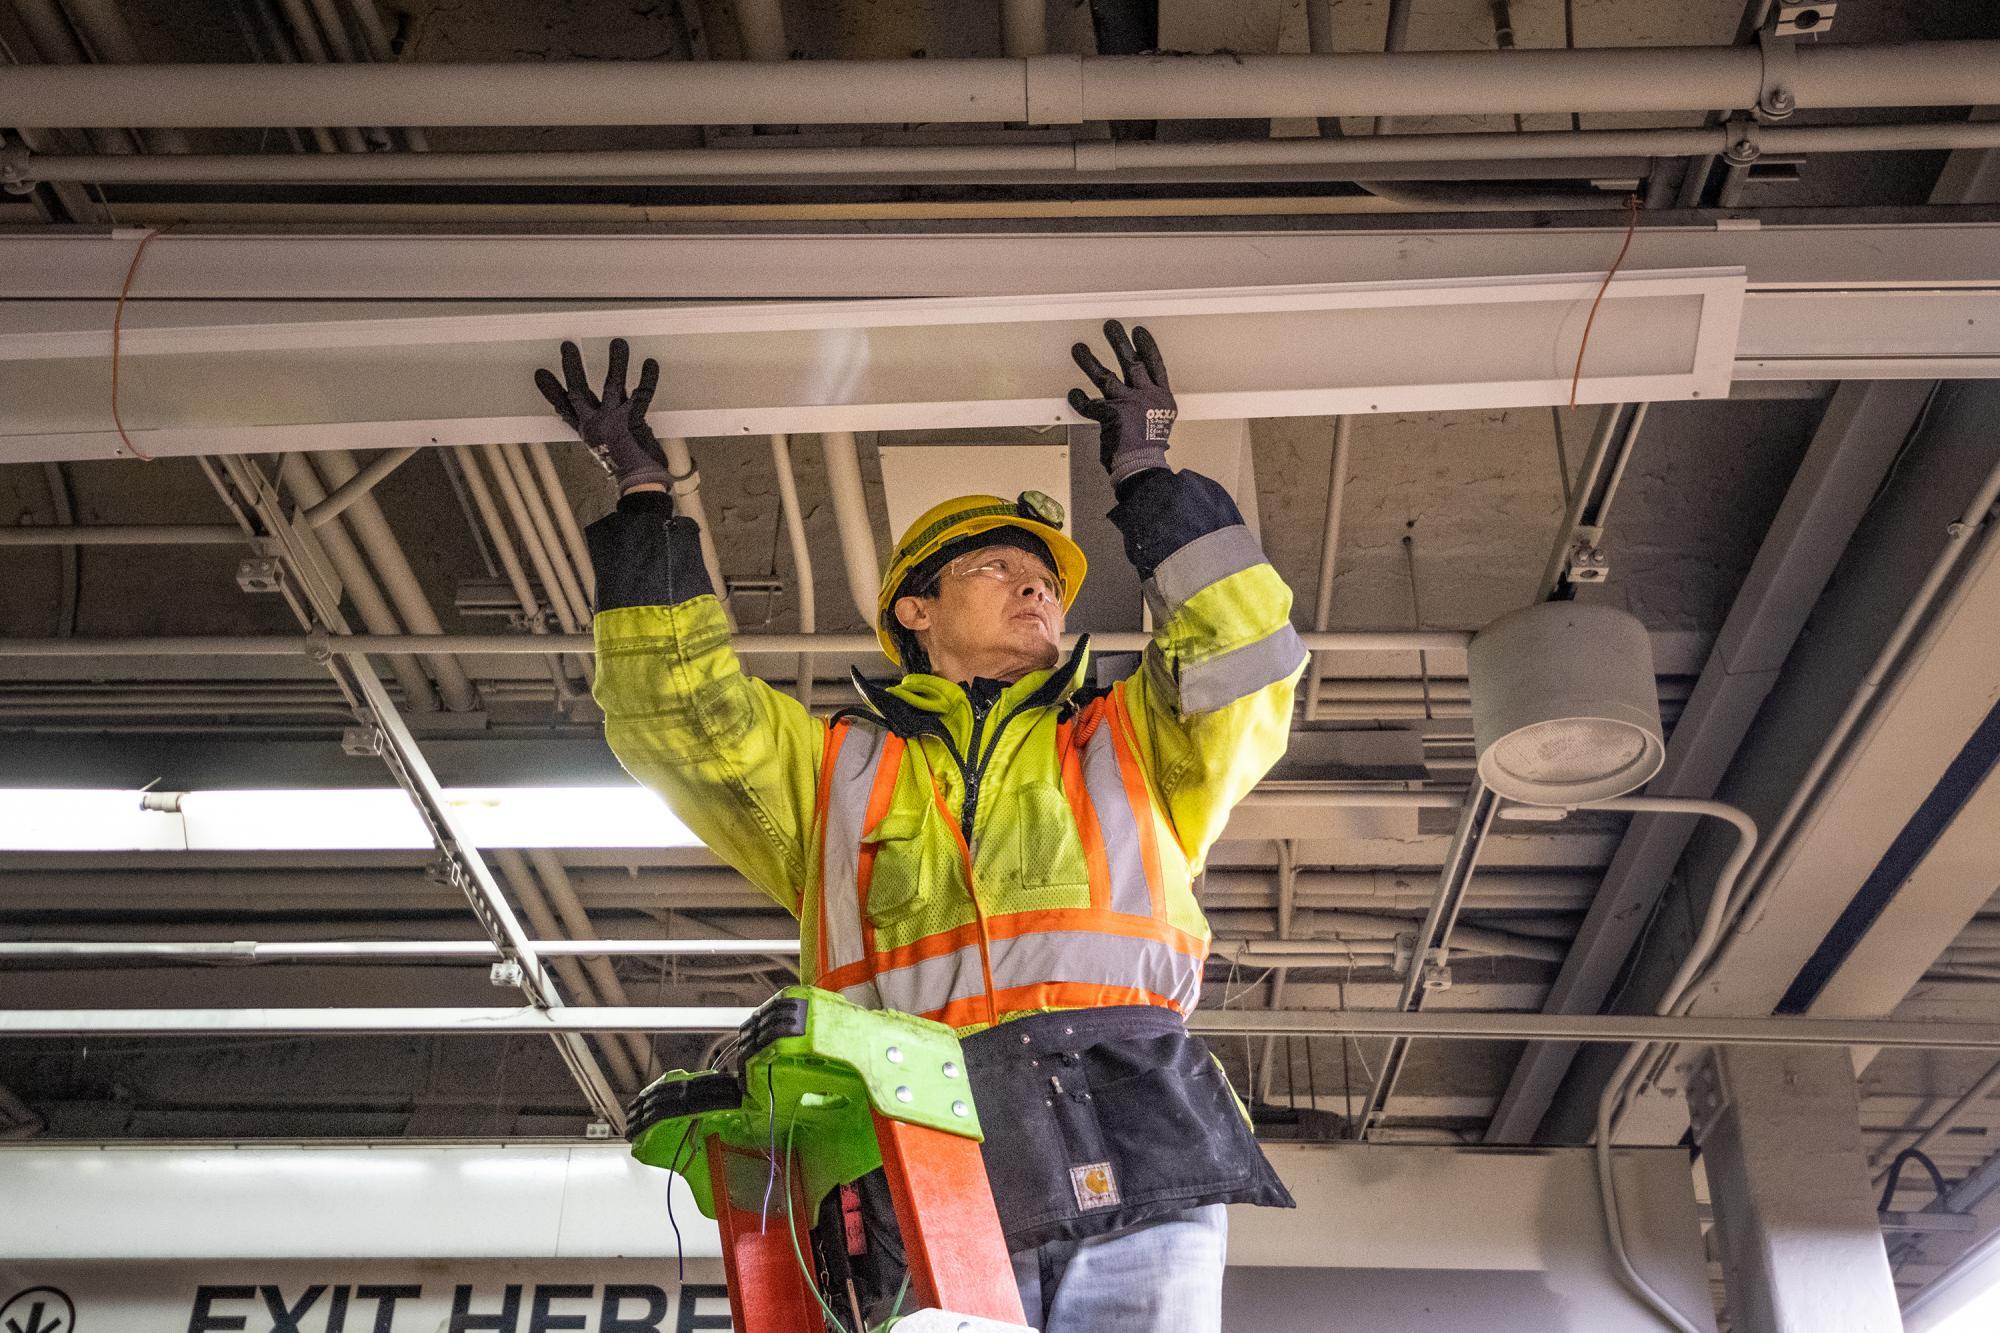 A crewman installs new lights above the Green Line at Park Street